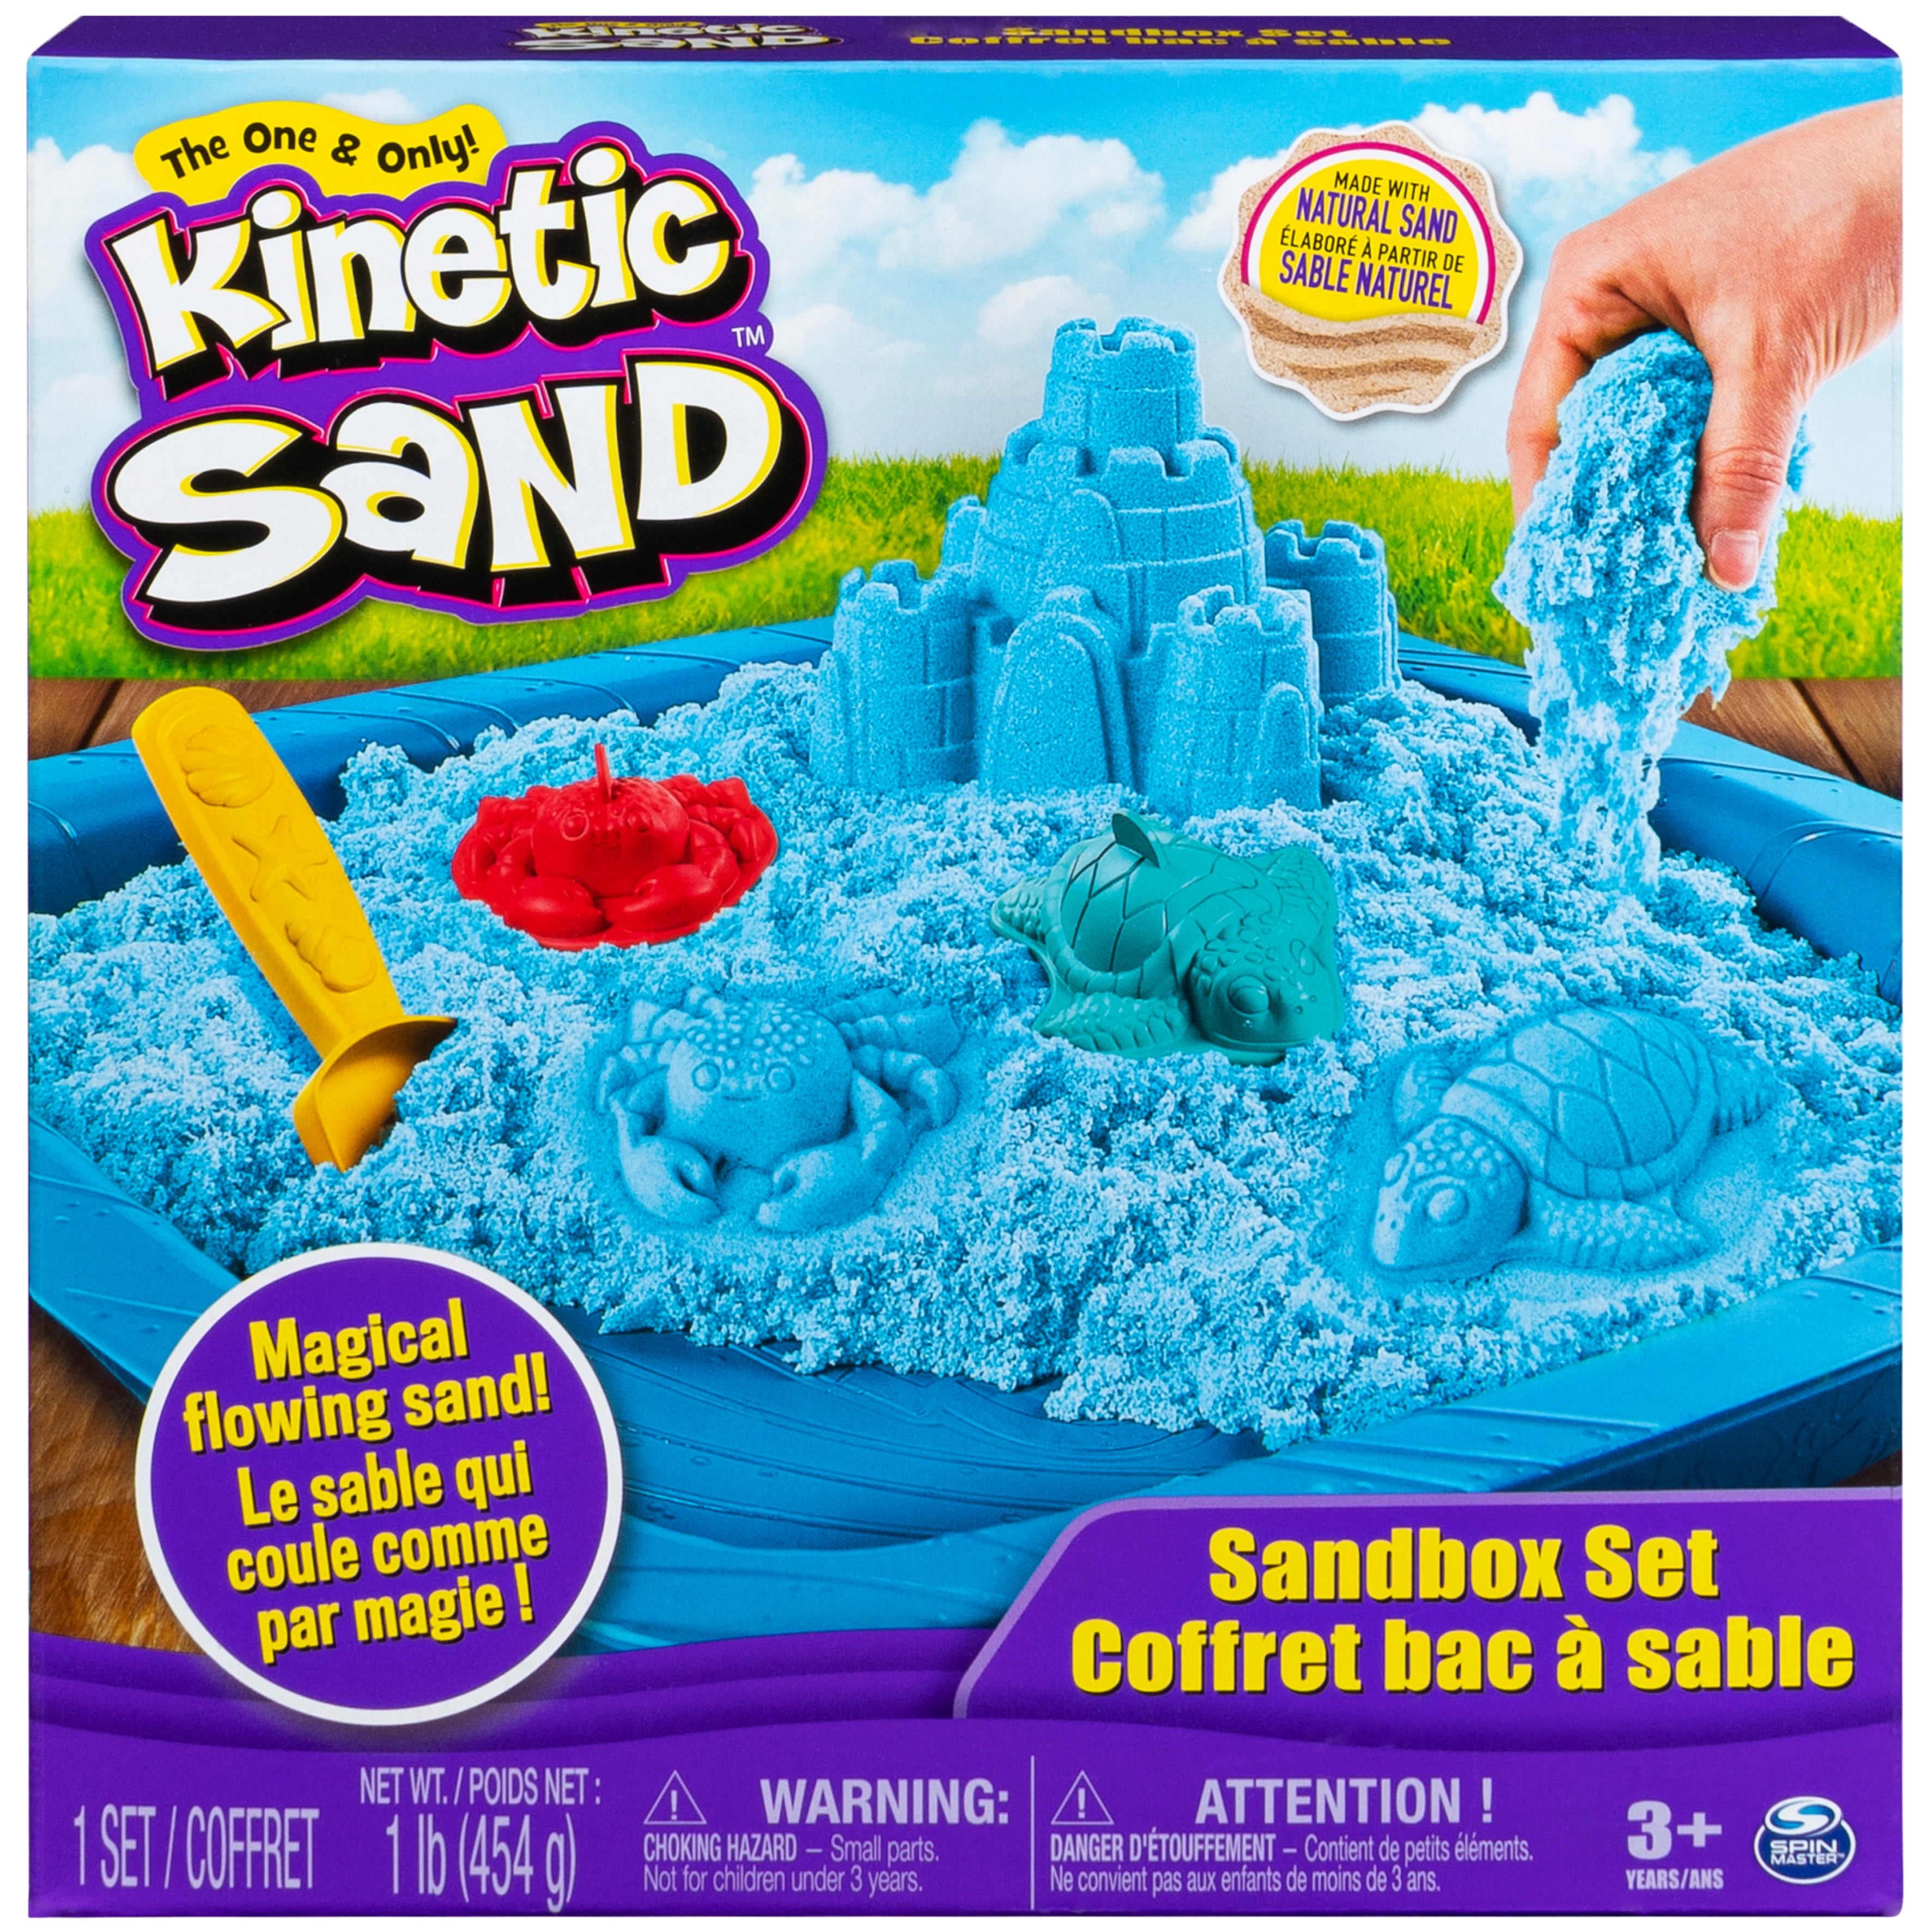 Kinetic Sand - SANDisfactory set - Hands on Play Set for Kids- Natural –  Touty Toys